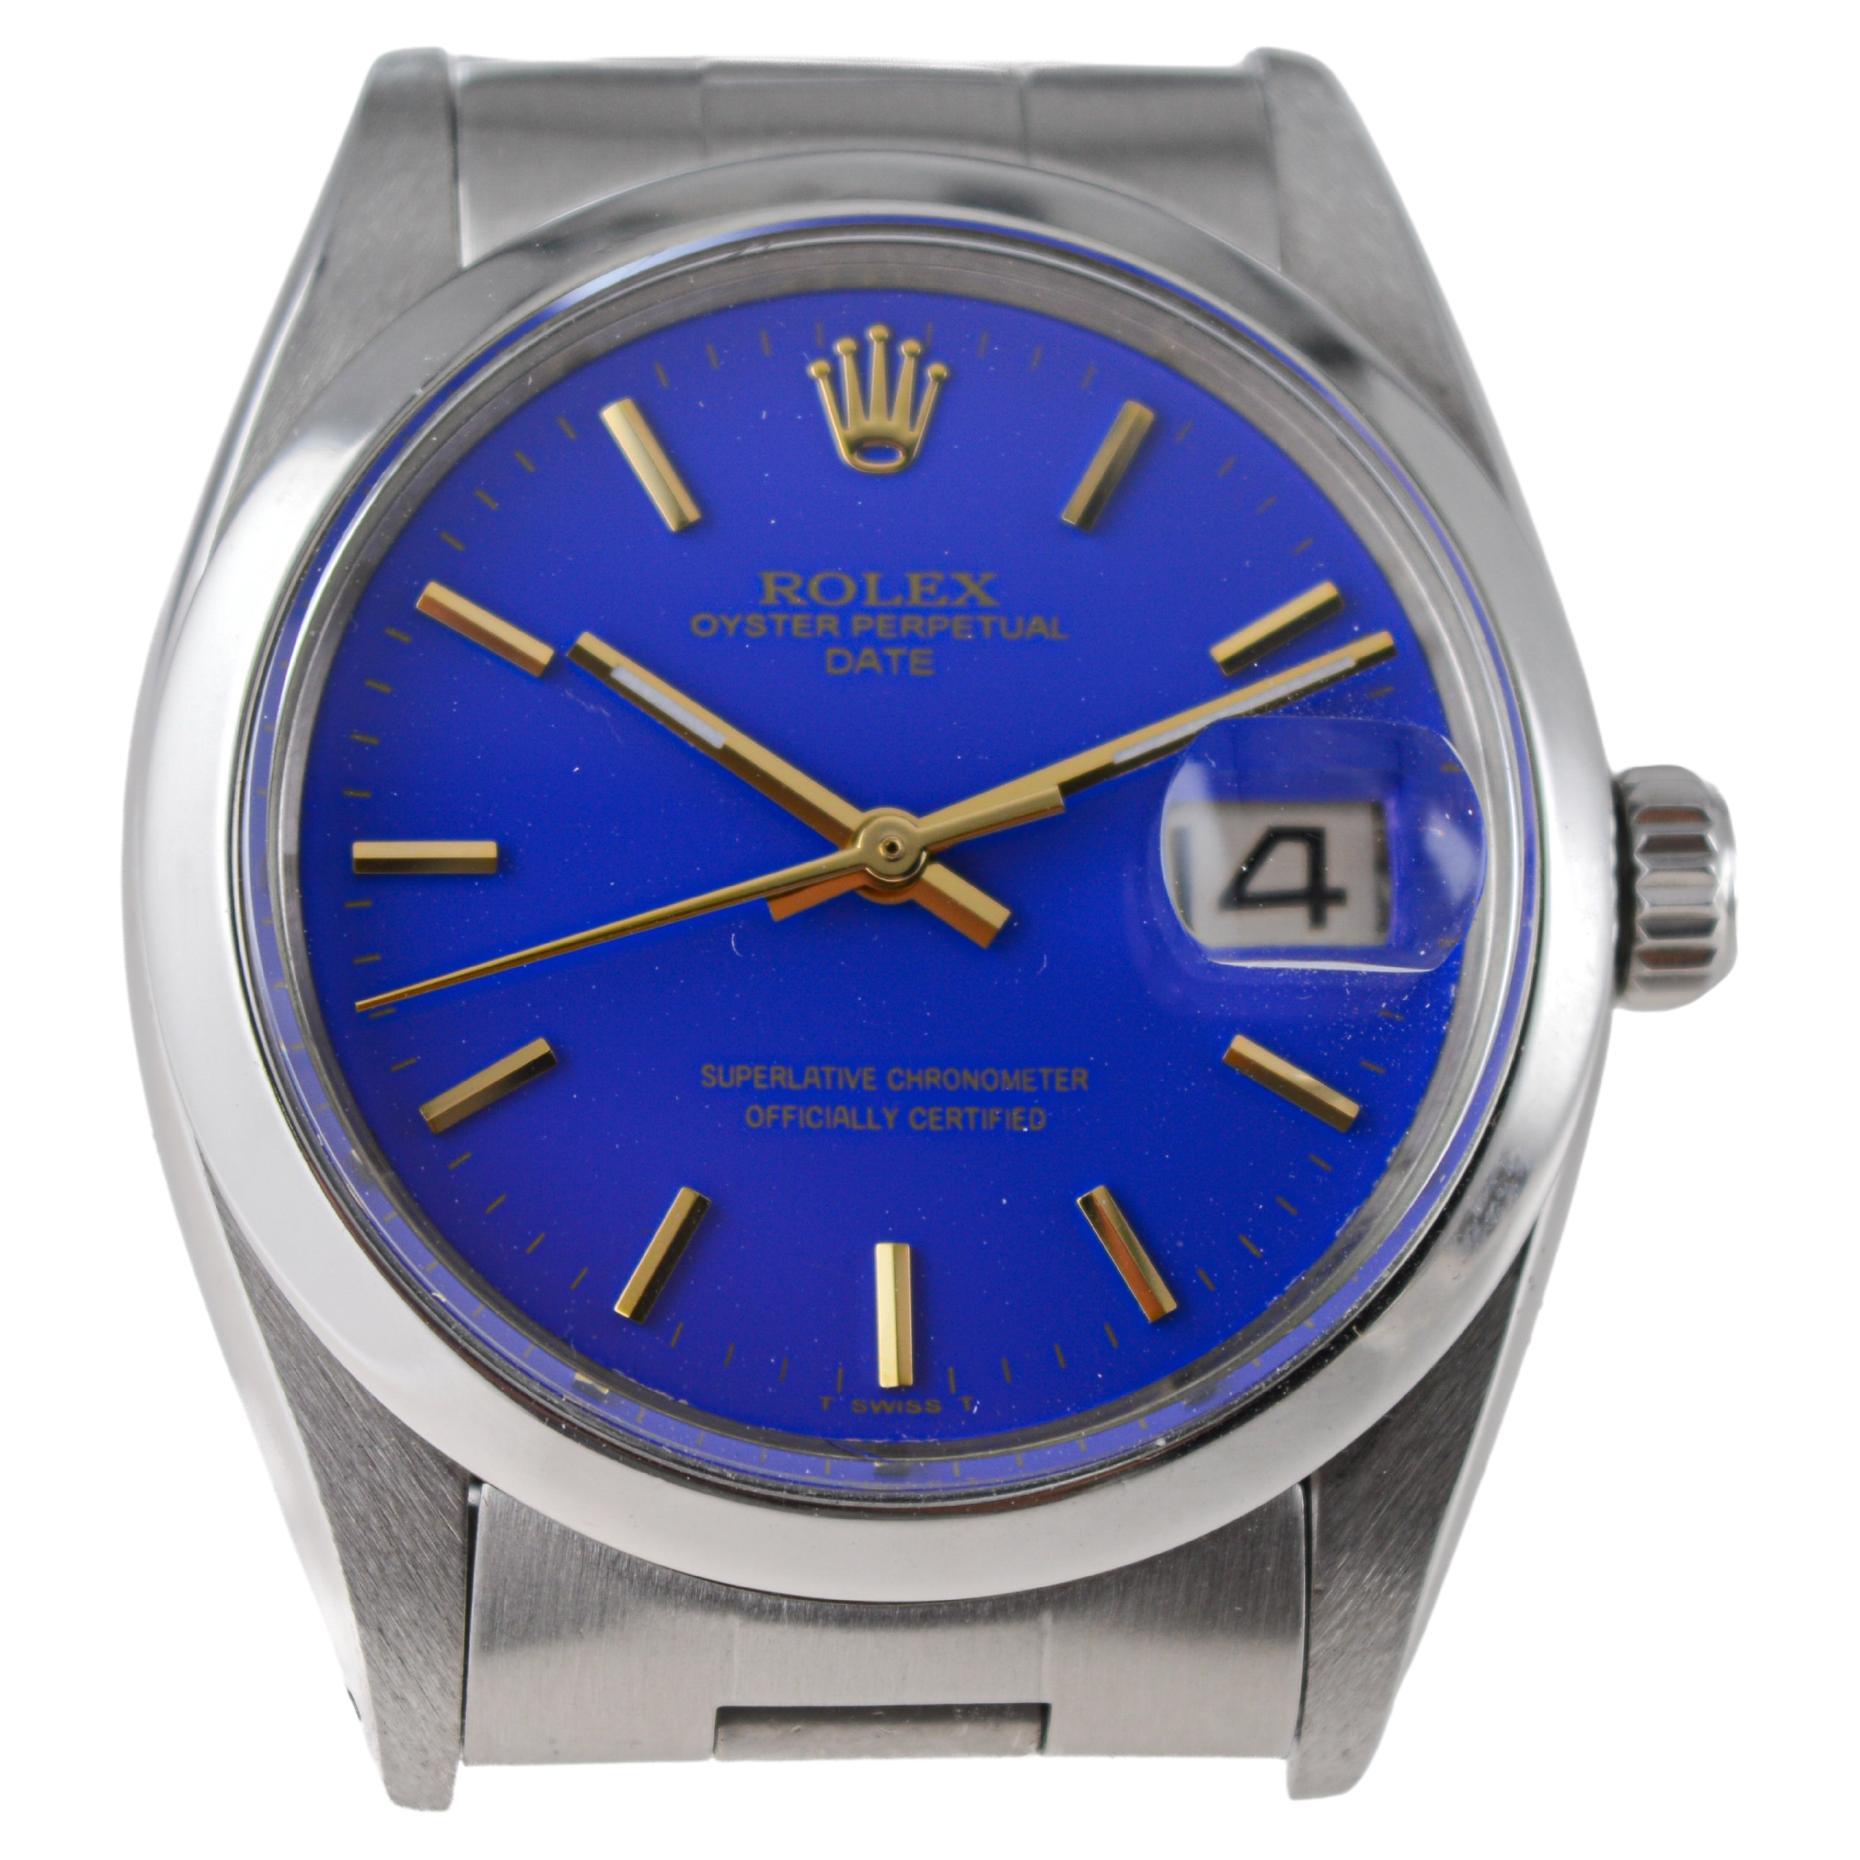 Rolex Steel Oyster Perpetual Date With Custom Made Deep Blue Dial circa 1960's For Sale 2